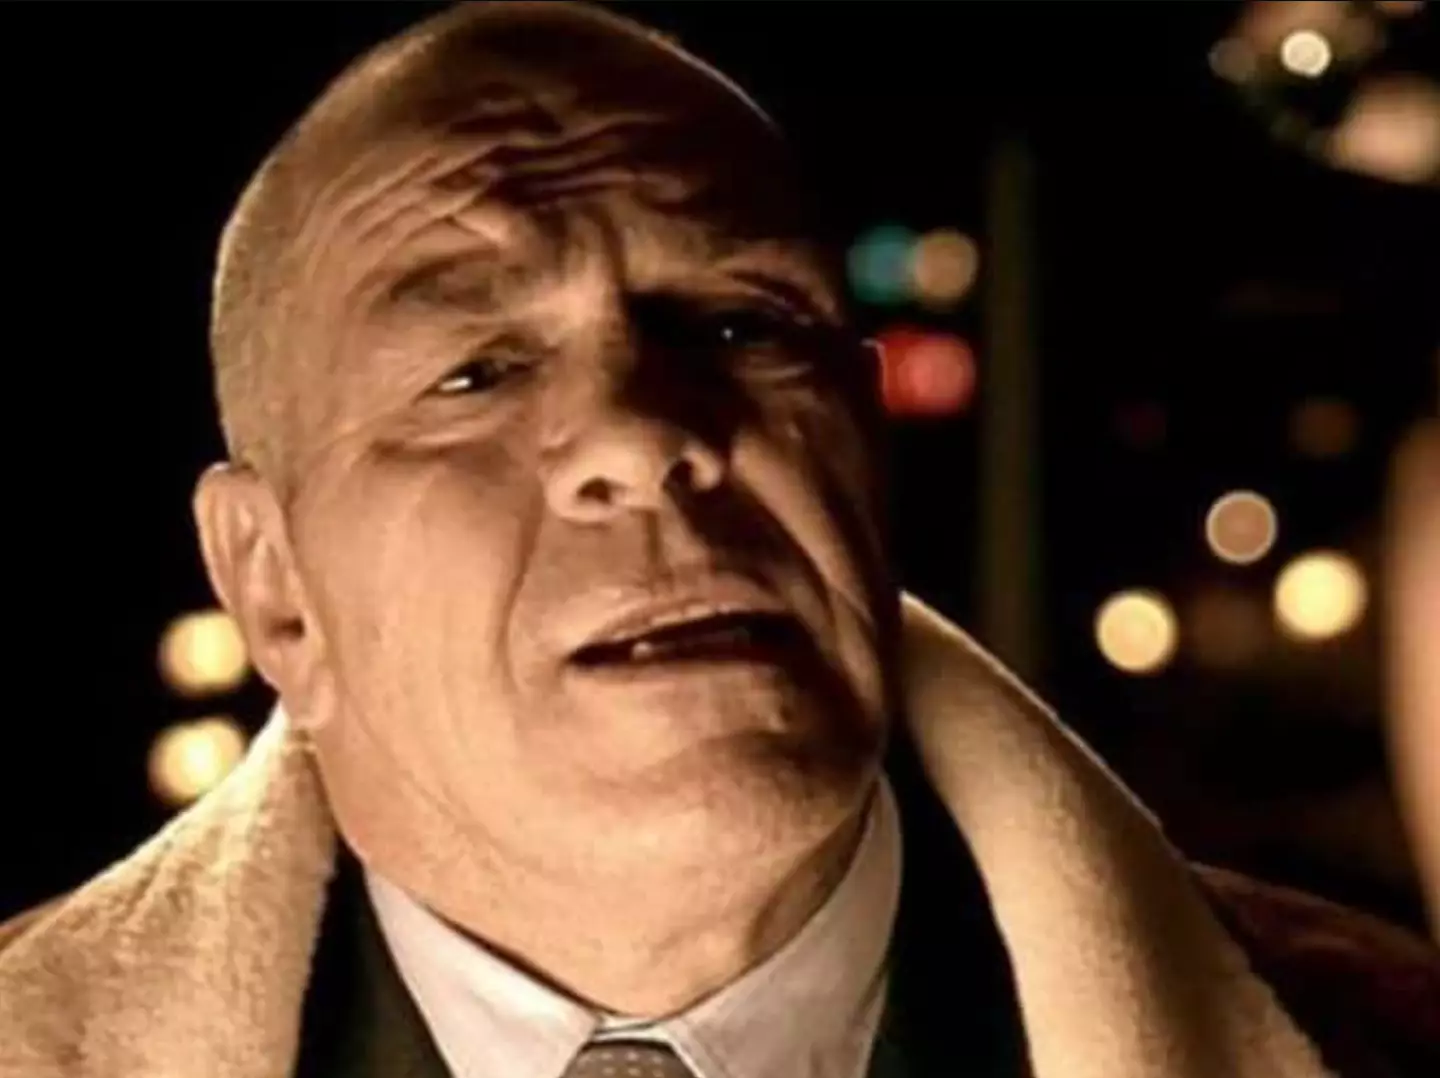 Lenny McClean as Barry the Baptist in Lock, Stock and Two Smoking Barrels.